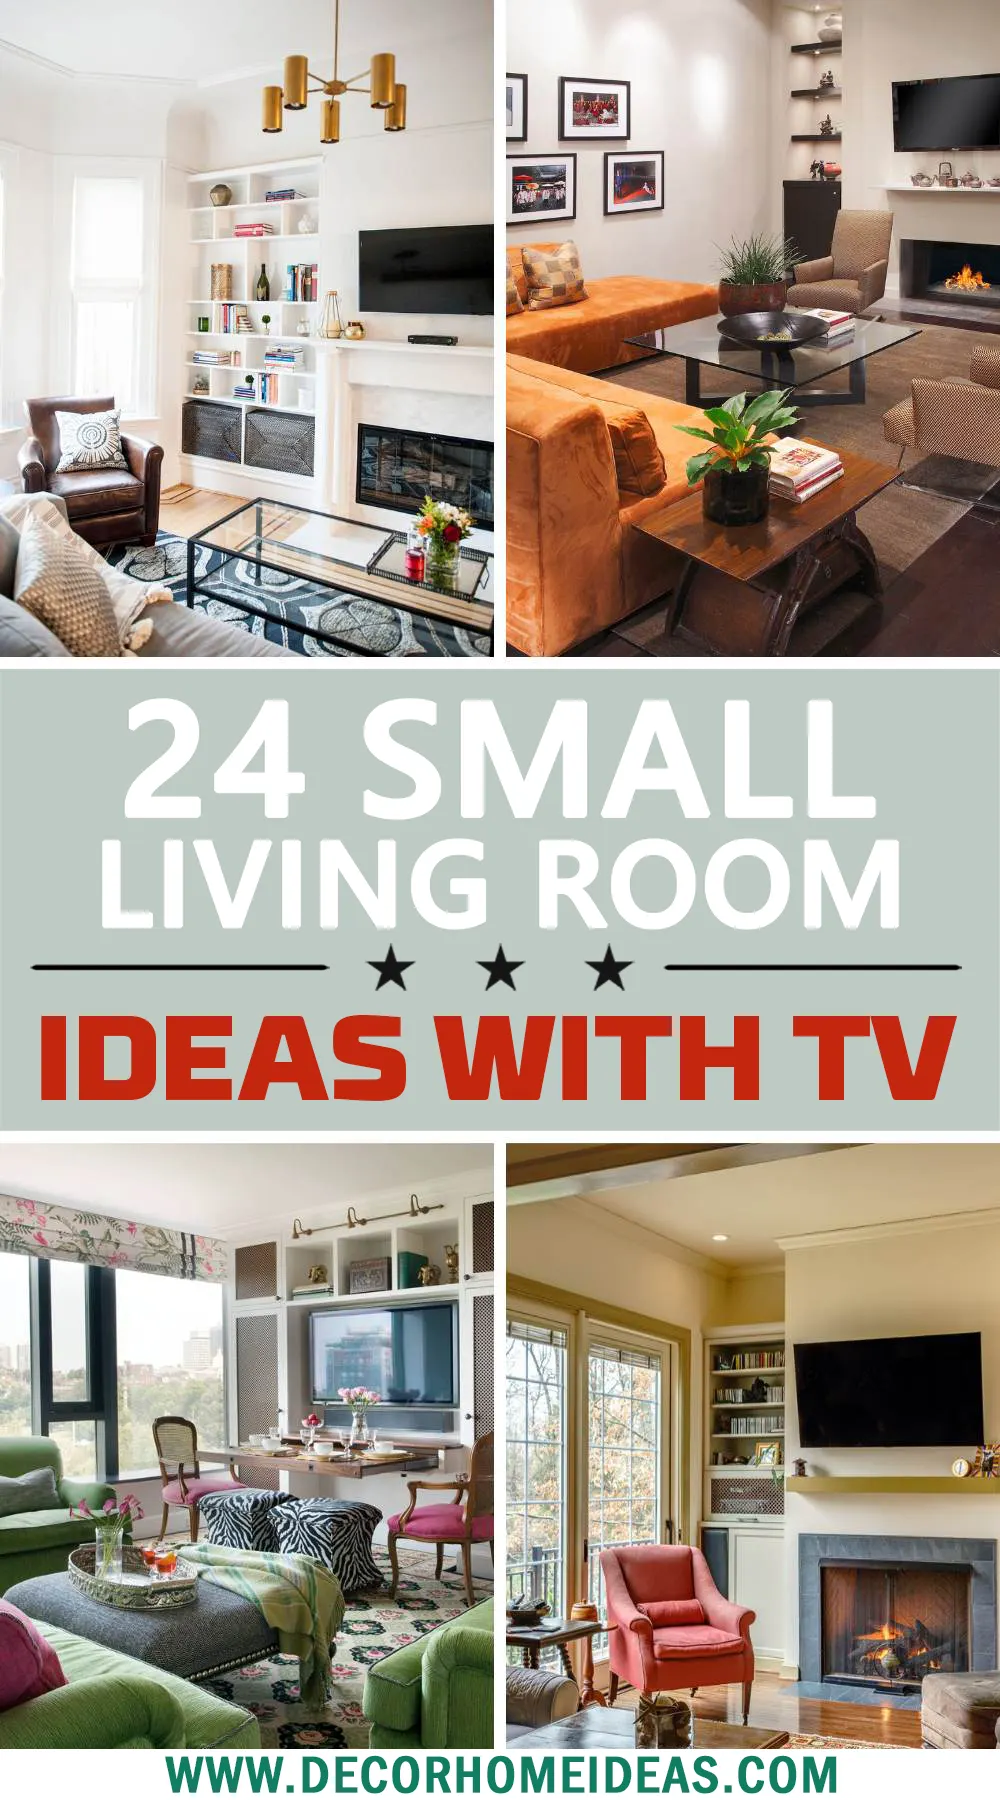 We will explore 24 creative and practical small living room ideas that incorporate a TV, from clever storage solutions to space-saving furniture arrangements, and lighting tricks that enhance the overall ambiance of your space.